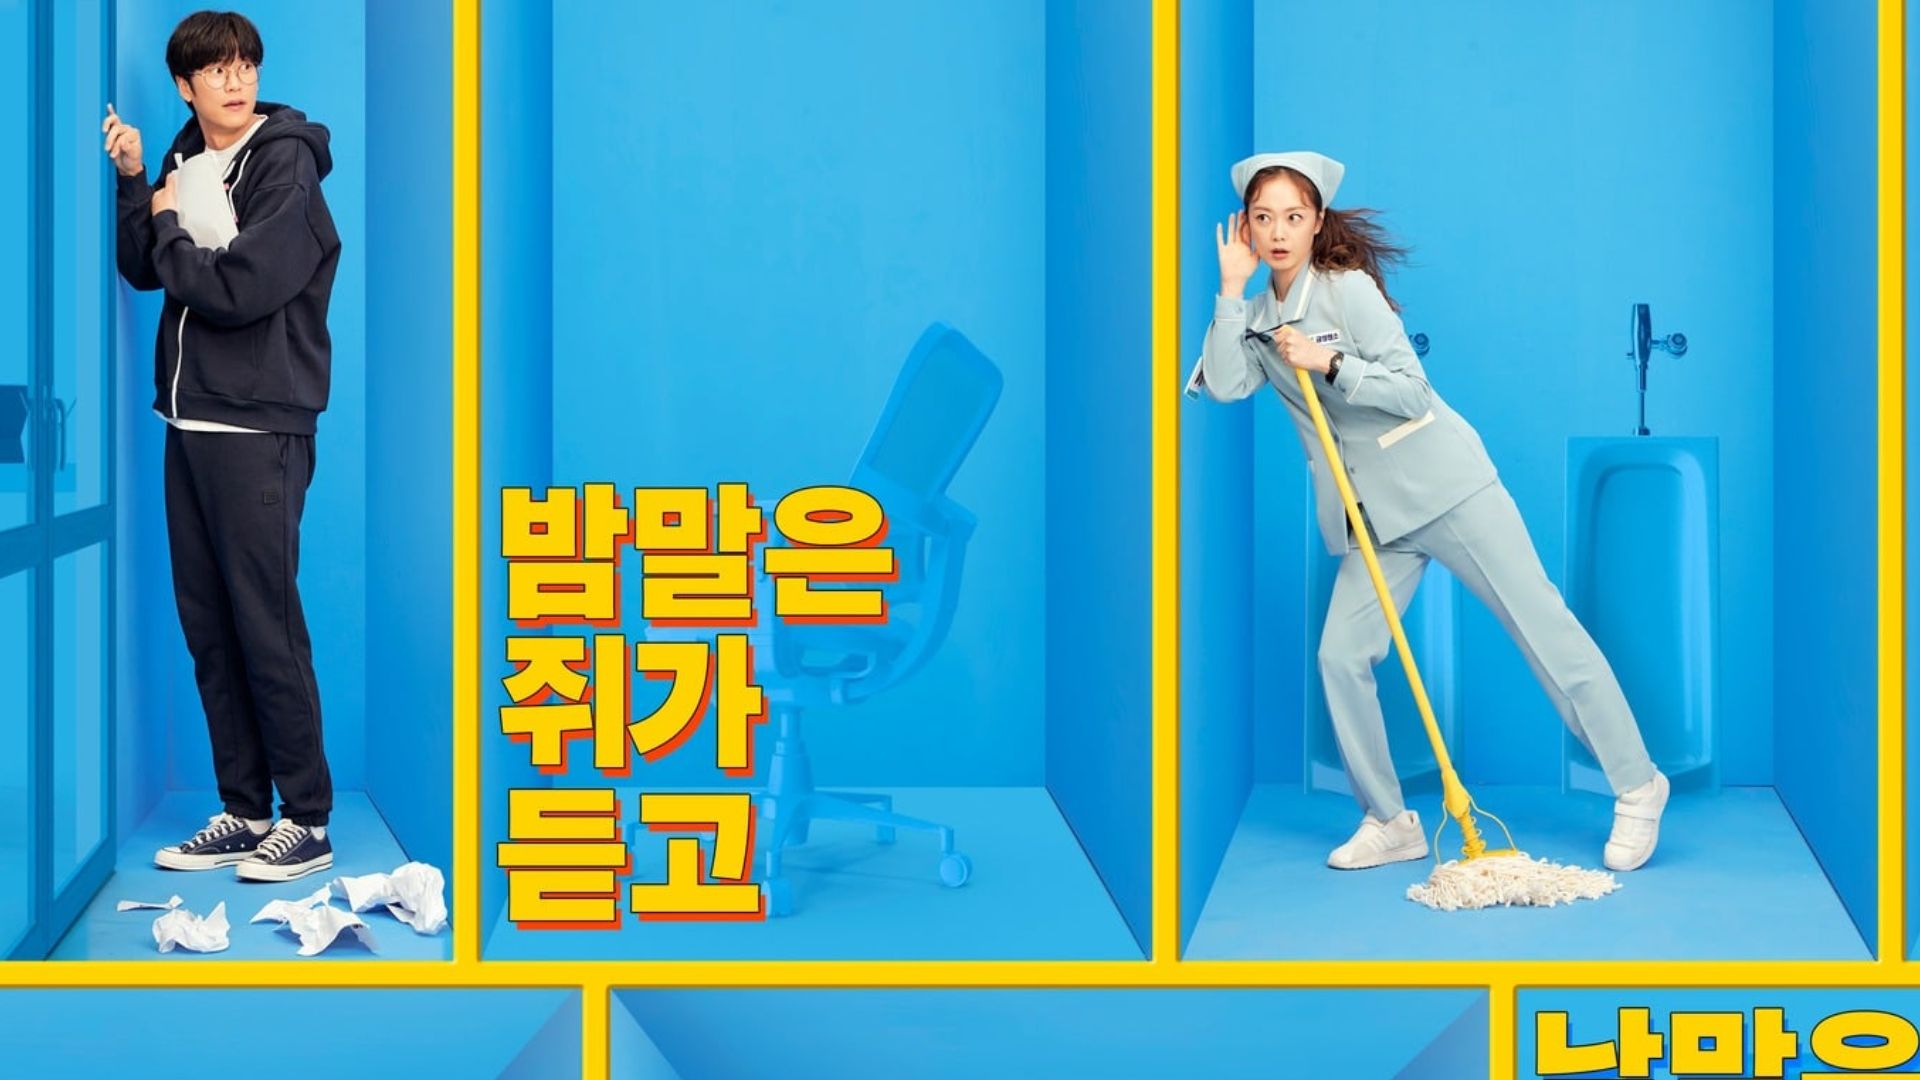 Cleaning Up New Poster – JTBC Unveils A New Concept